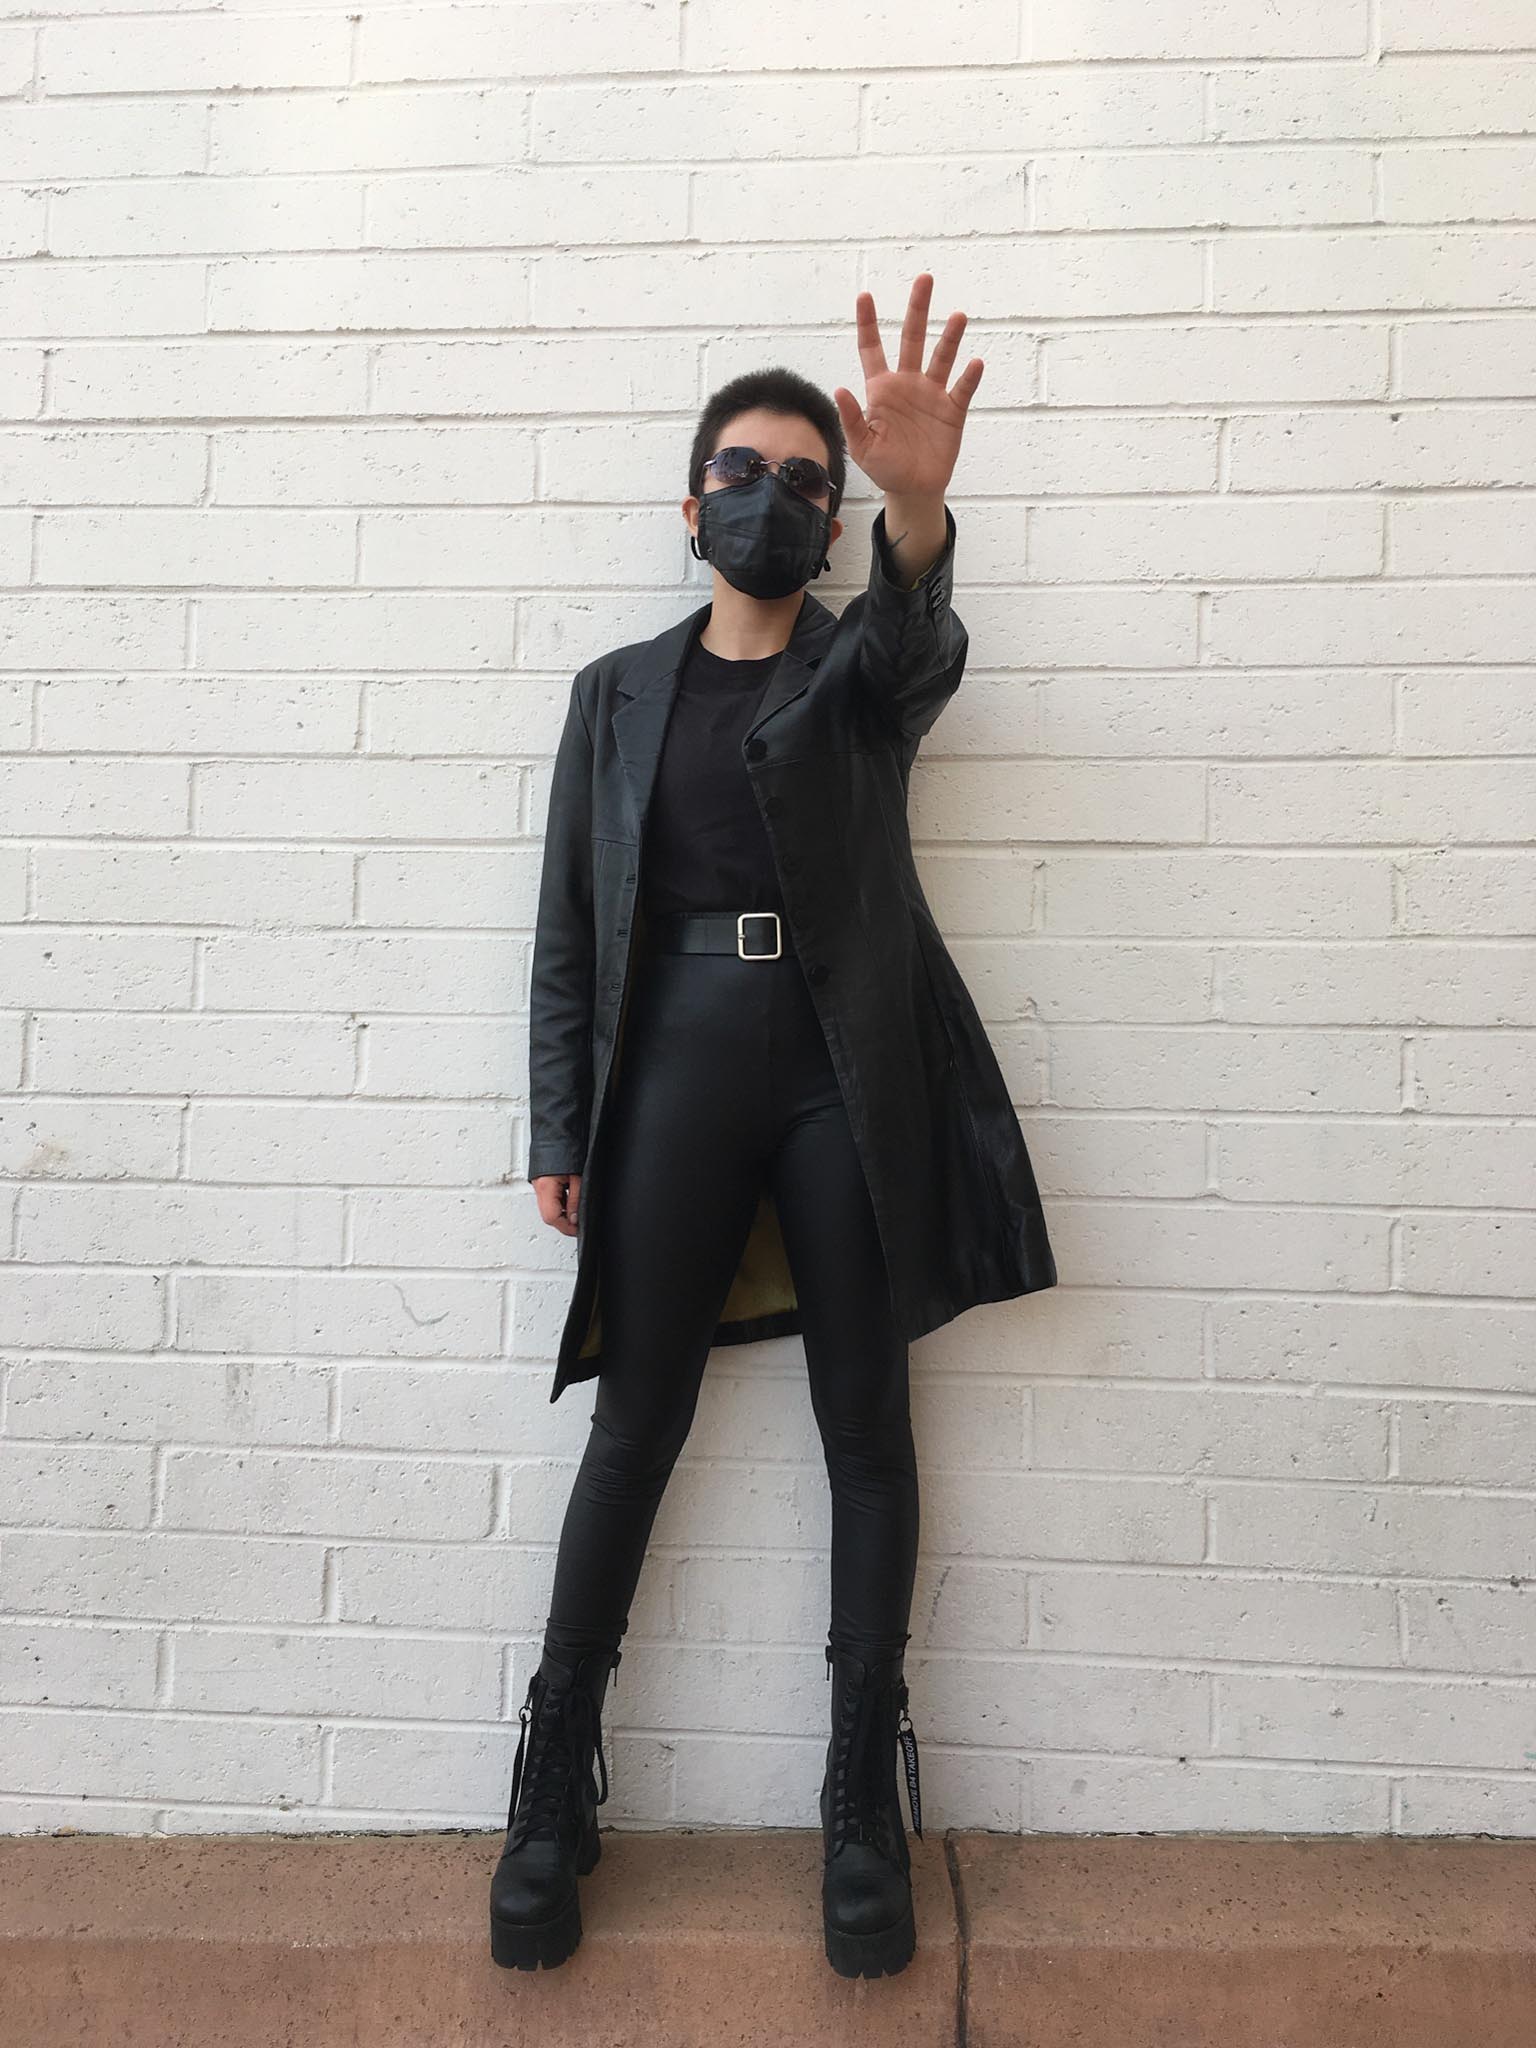 Person standing in front of brick wall in all black Matrix-inspired outfit with hand up in a stop motion